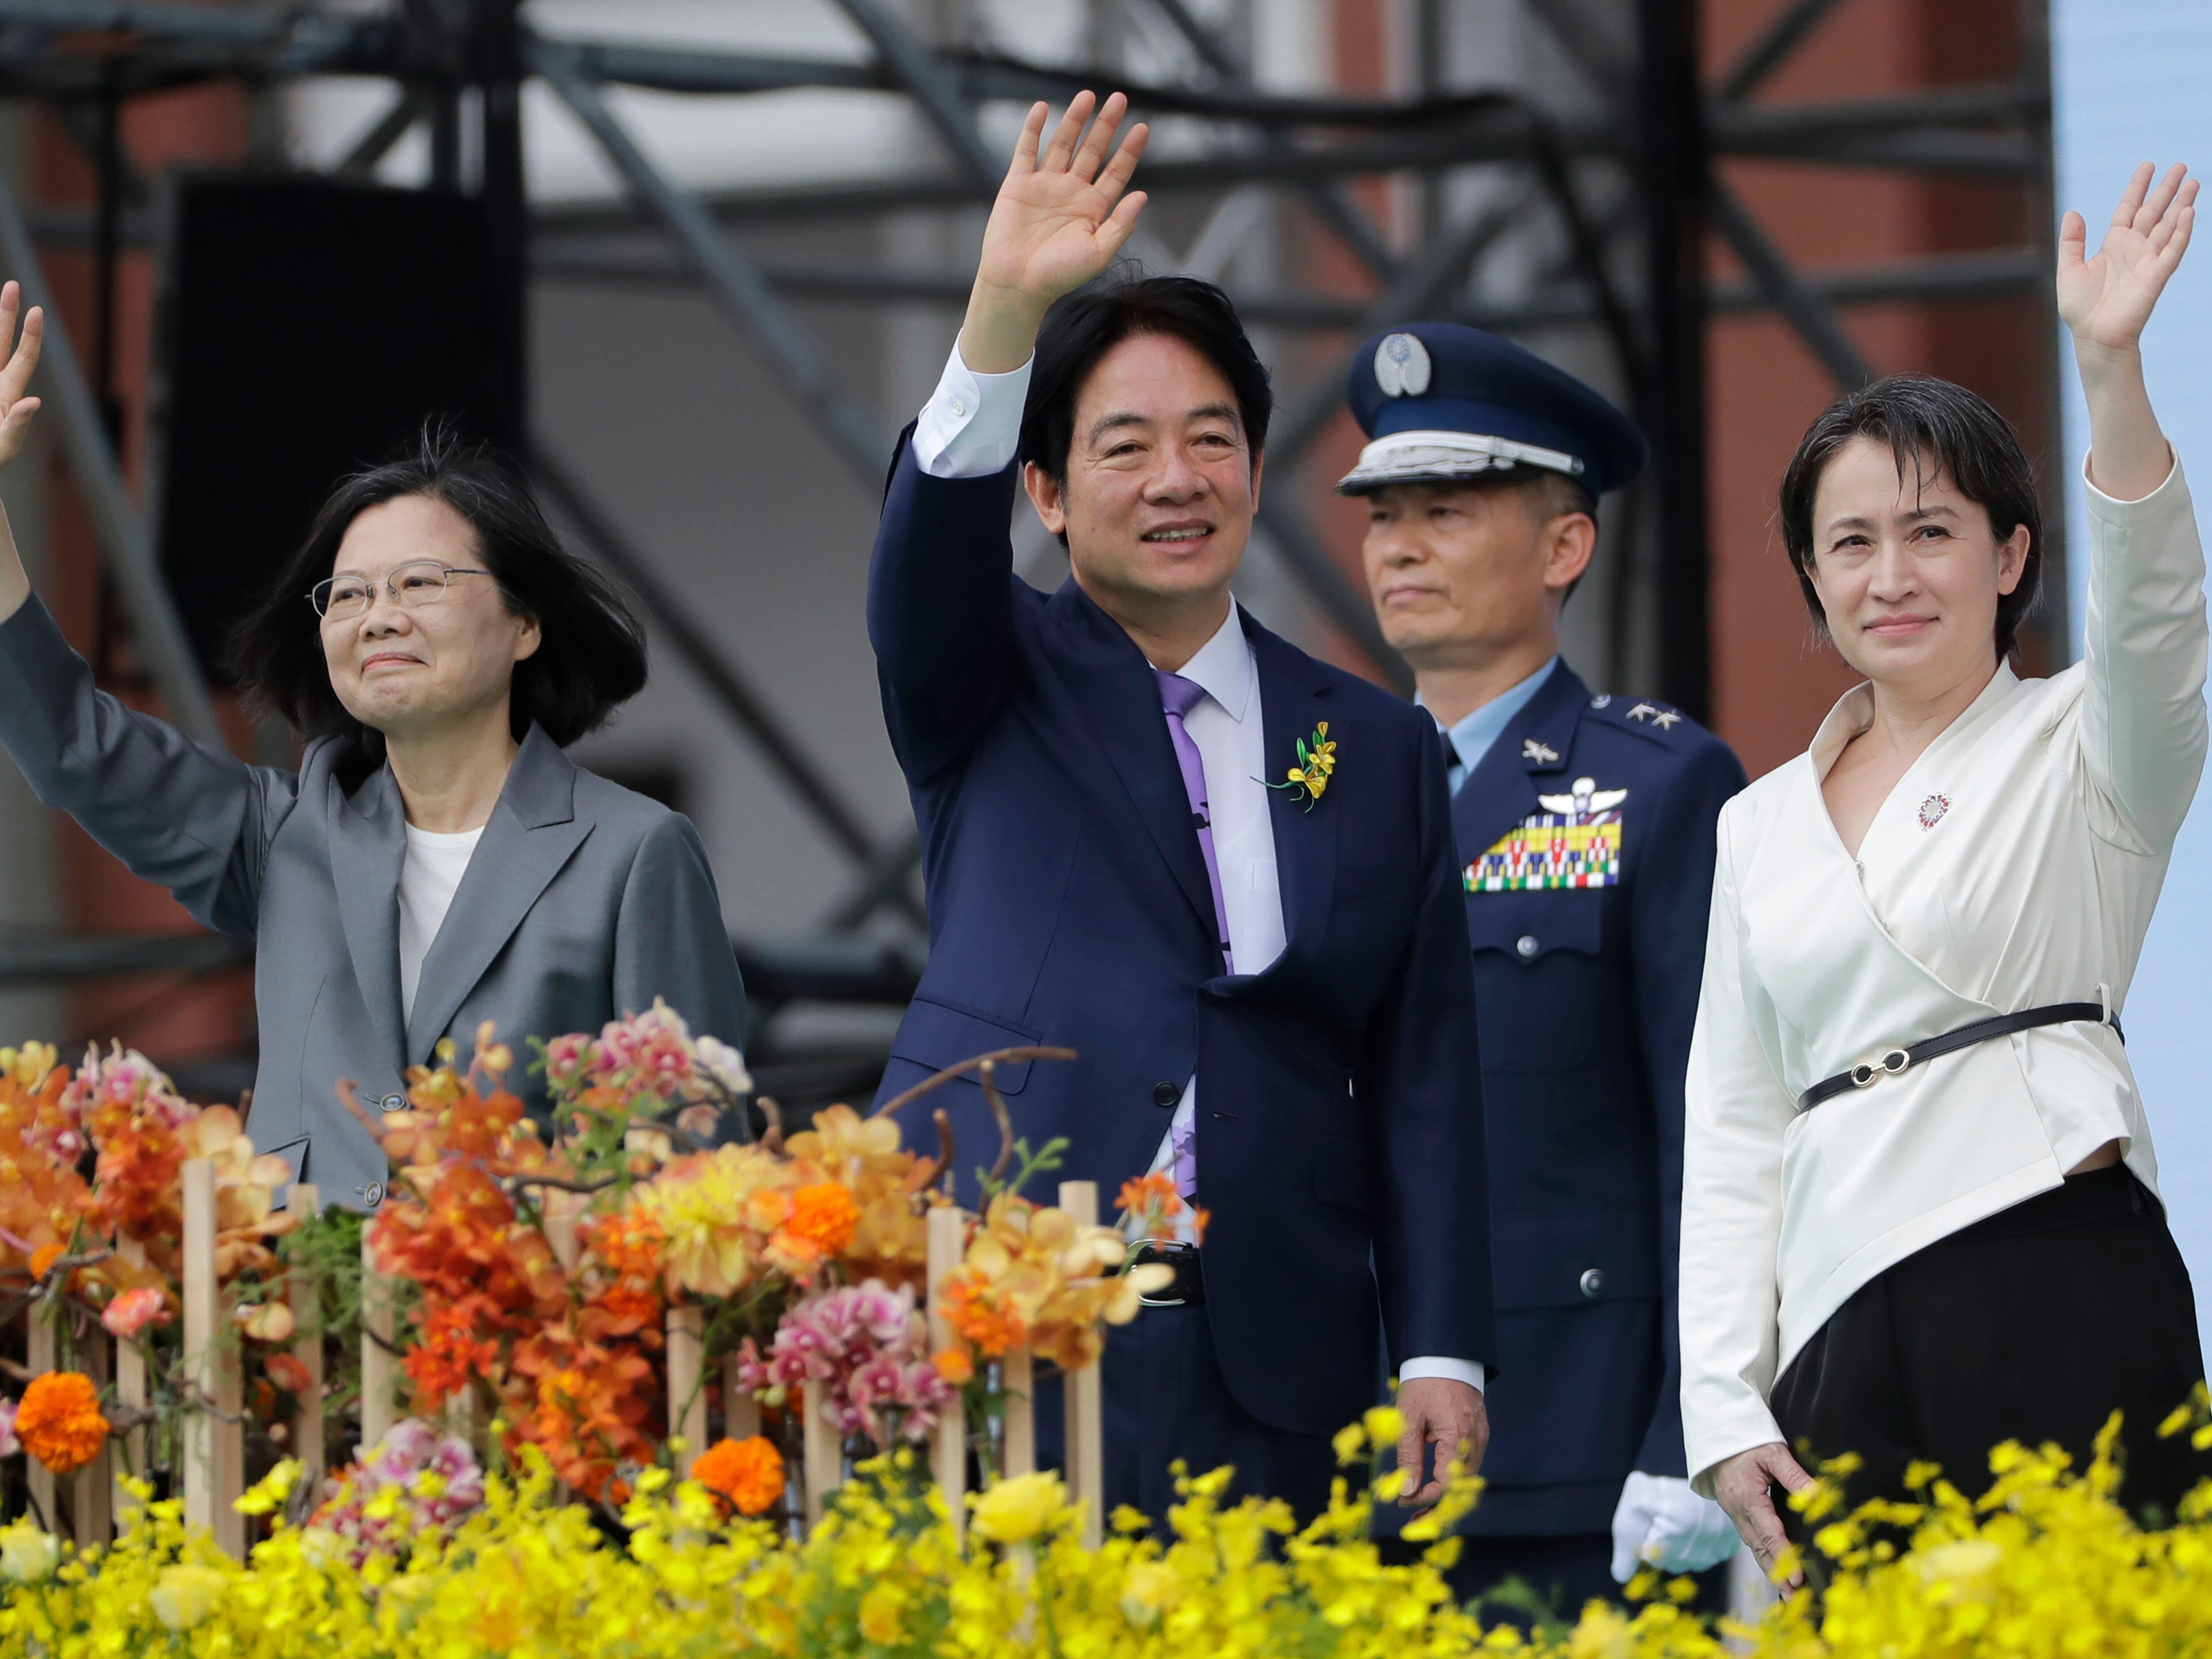 Lai Ching-te inaugurated as Taiwan’s president which will likely bolster US ties